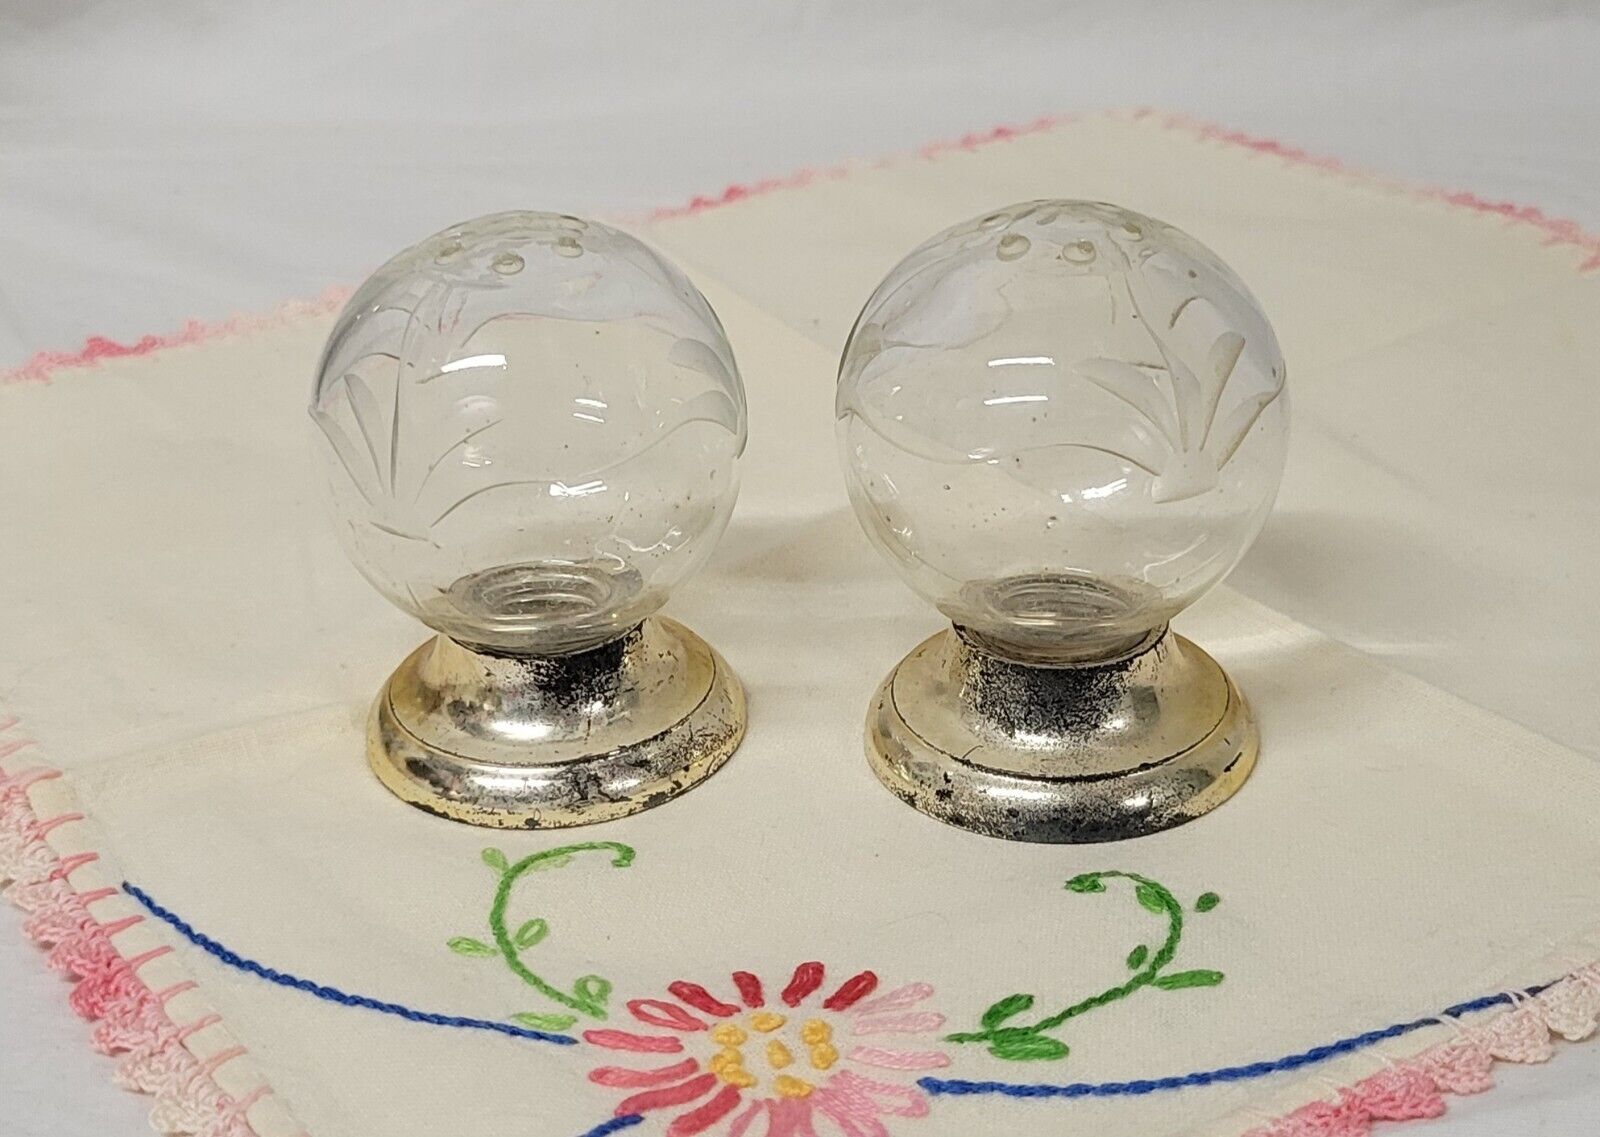 ANTIQUE SALT AND PEPPER SHAKERS GLASS BULB TOP VOGUE BY POOLE VINTAGE J105